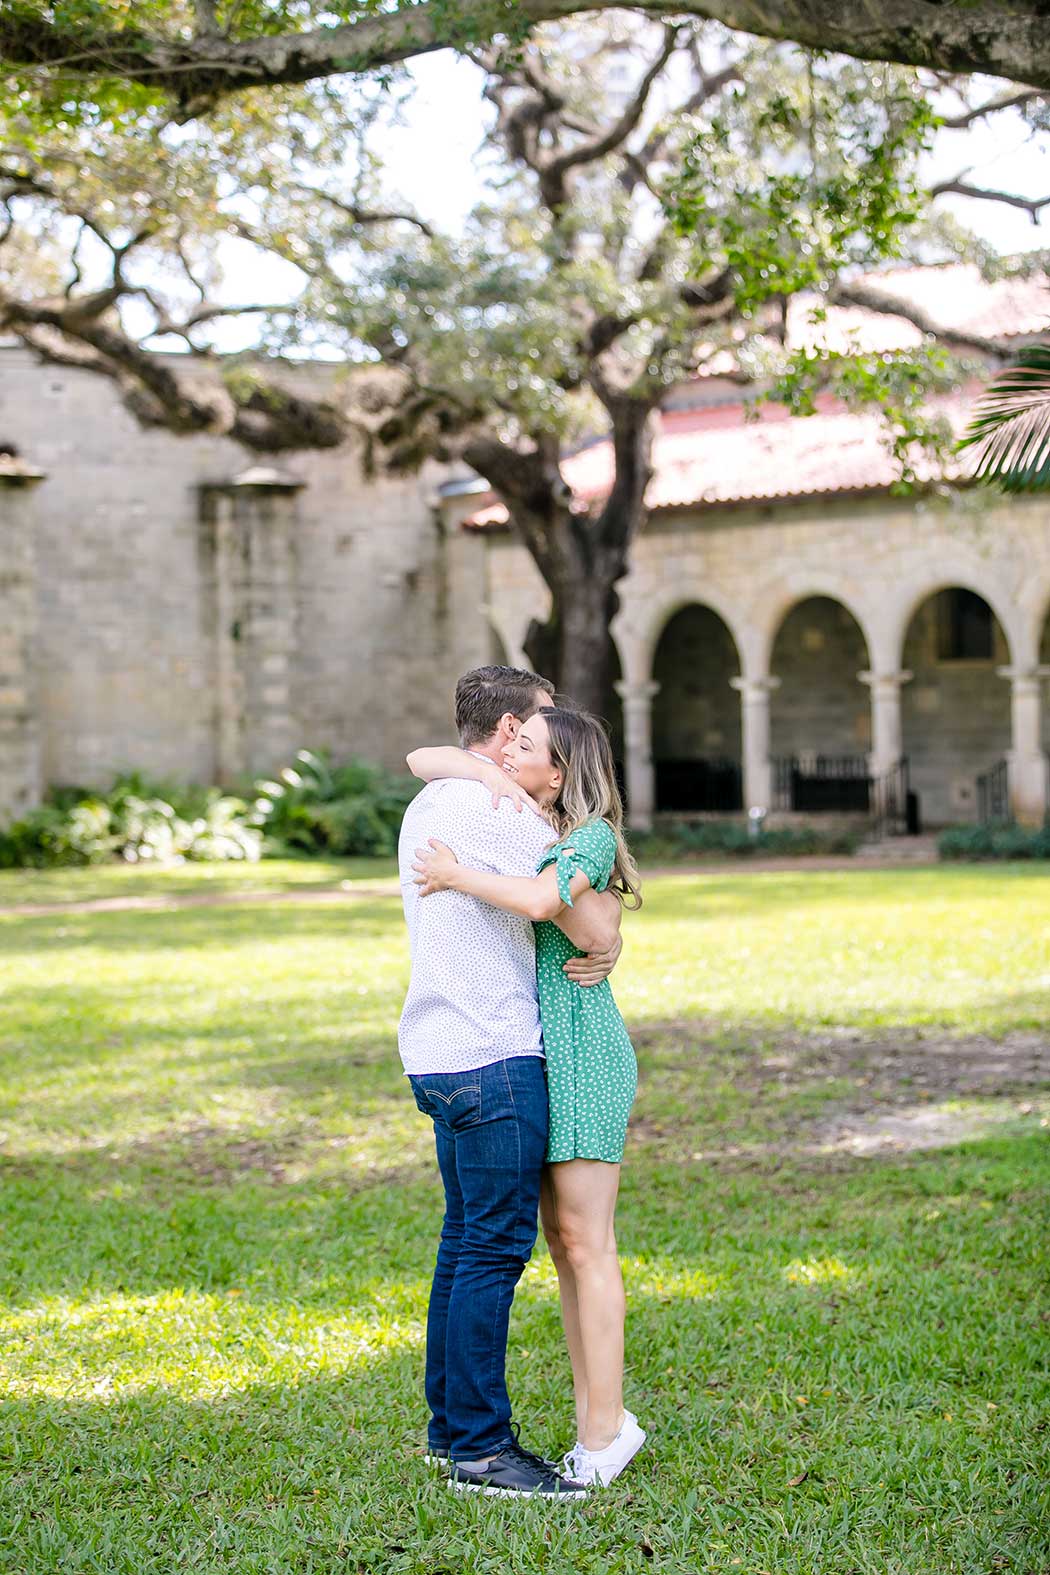 girl hugging boyfriend after surprise proposal | wedding proposal at ancient spanish monastery | engagement photographer fort lauderdale | ancient spanish monastery proposal photographer